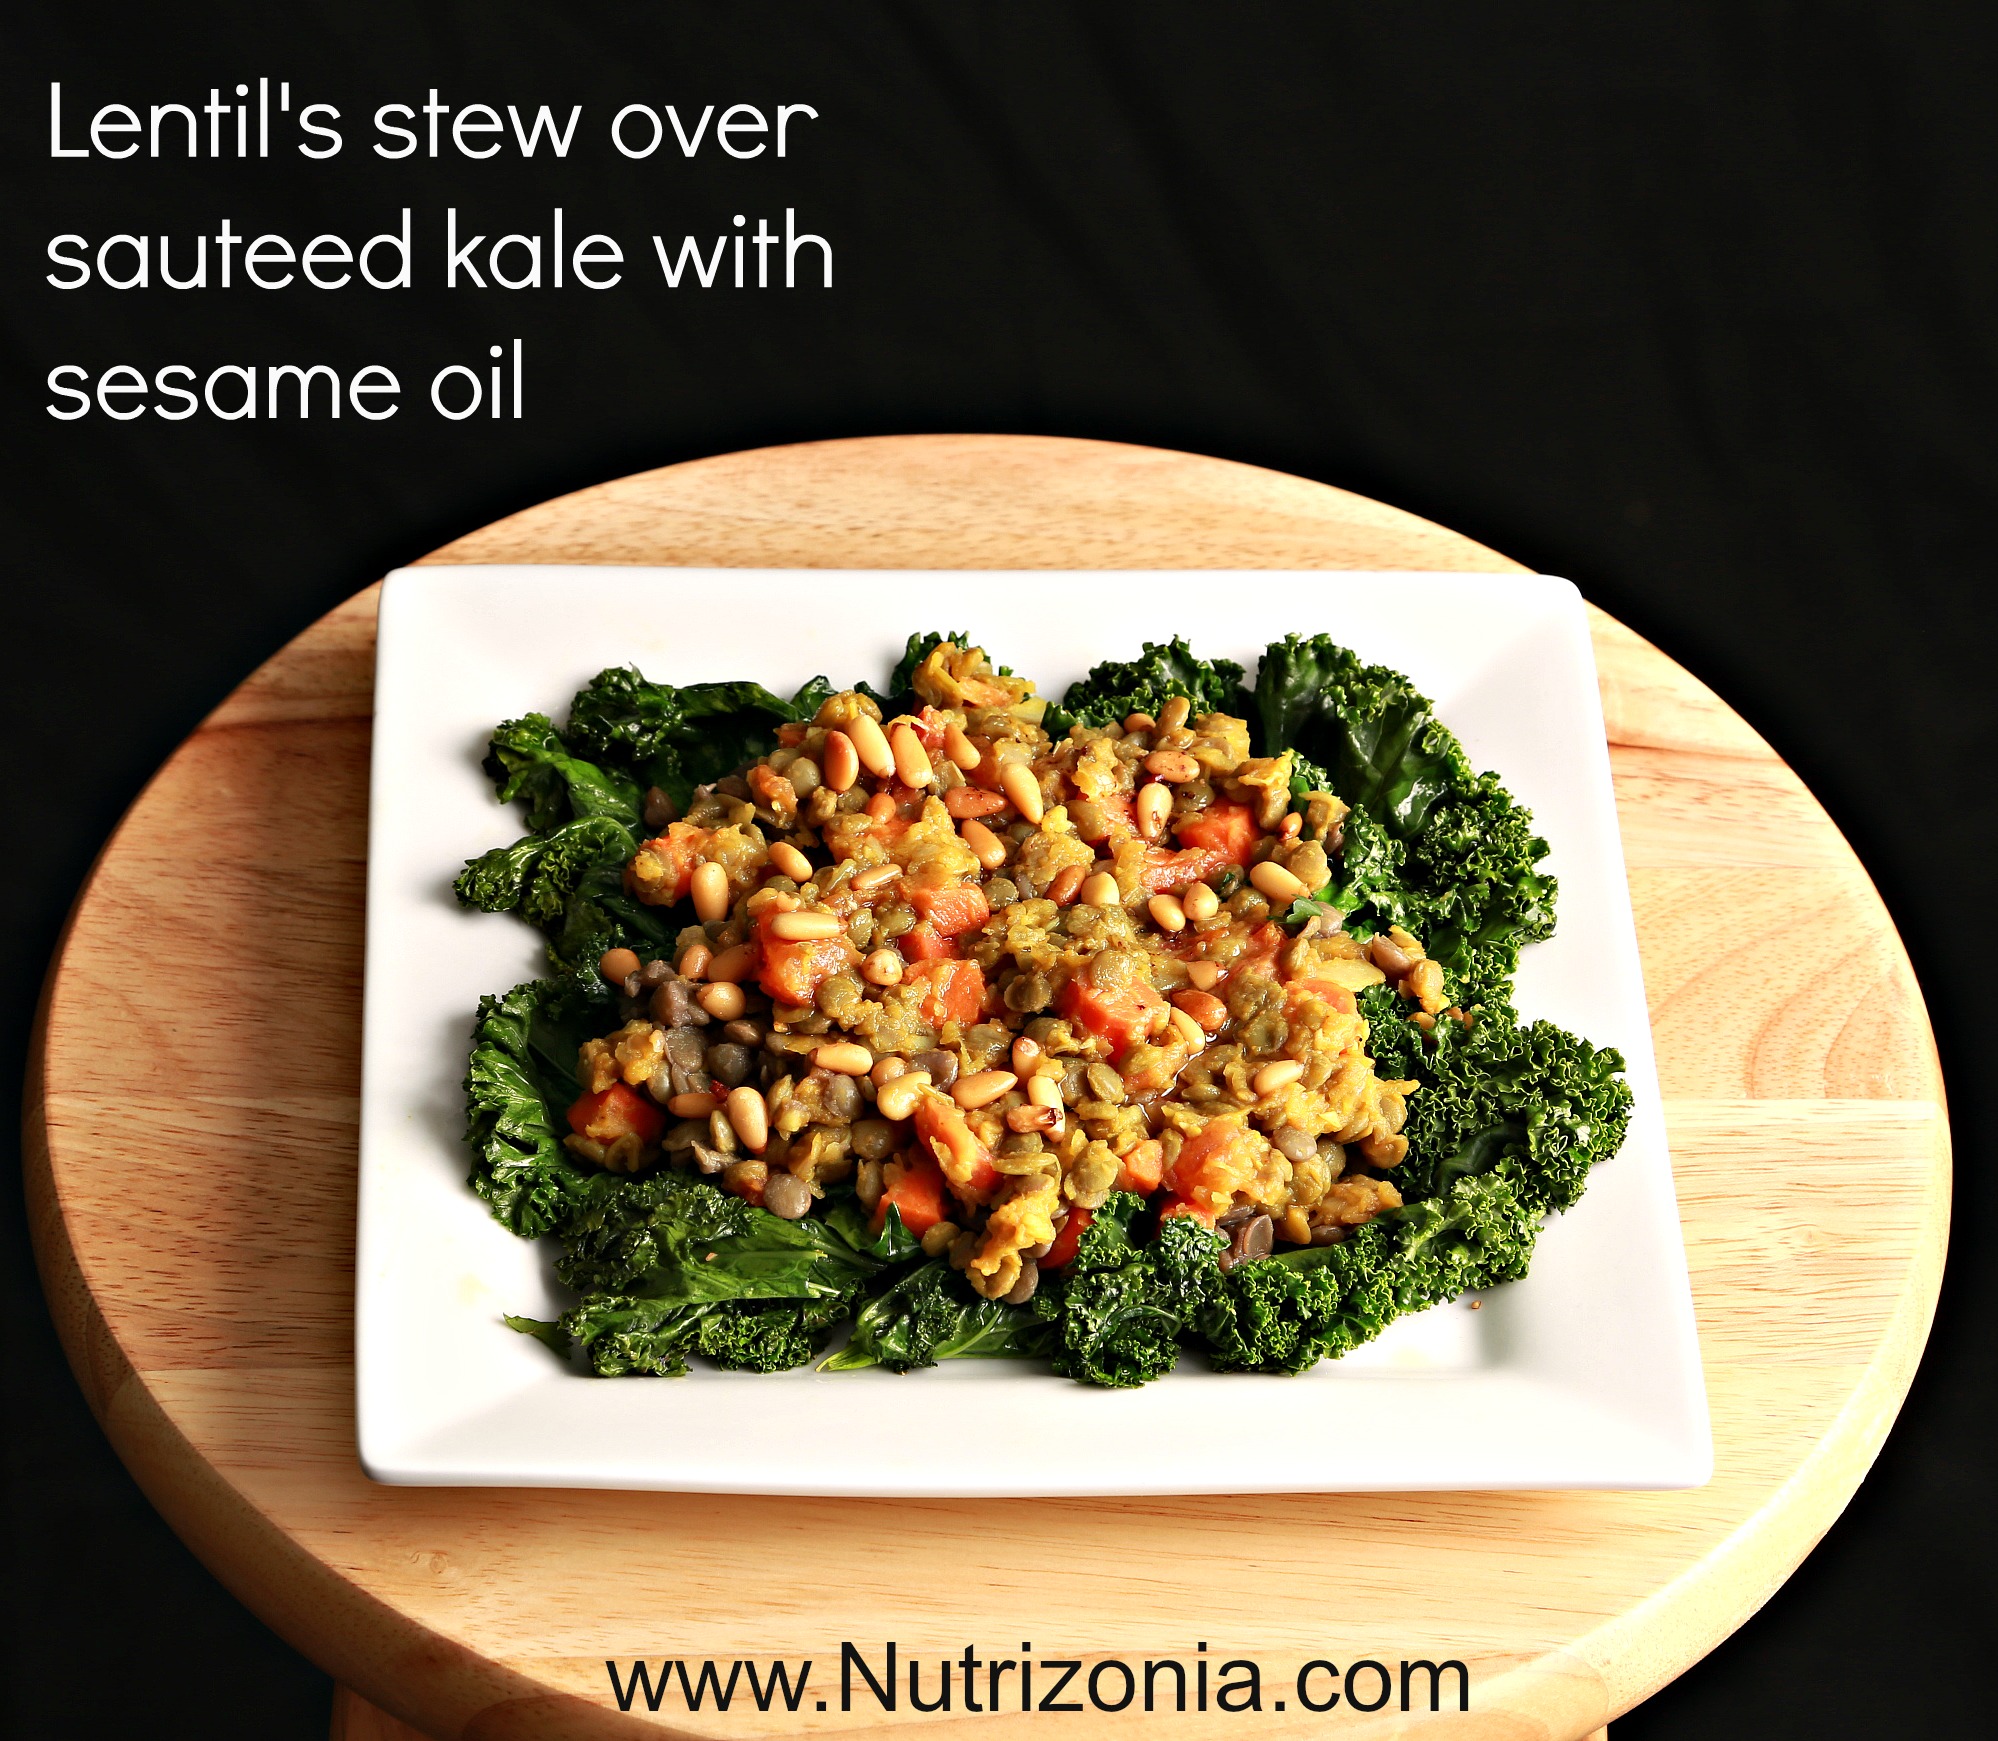 Lentil's stew over sauteed kale with sesame oil